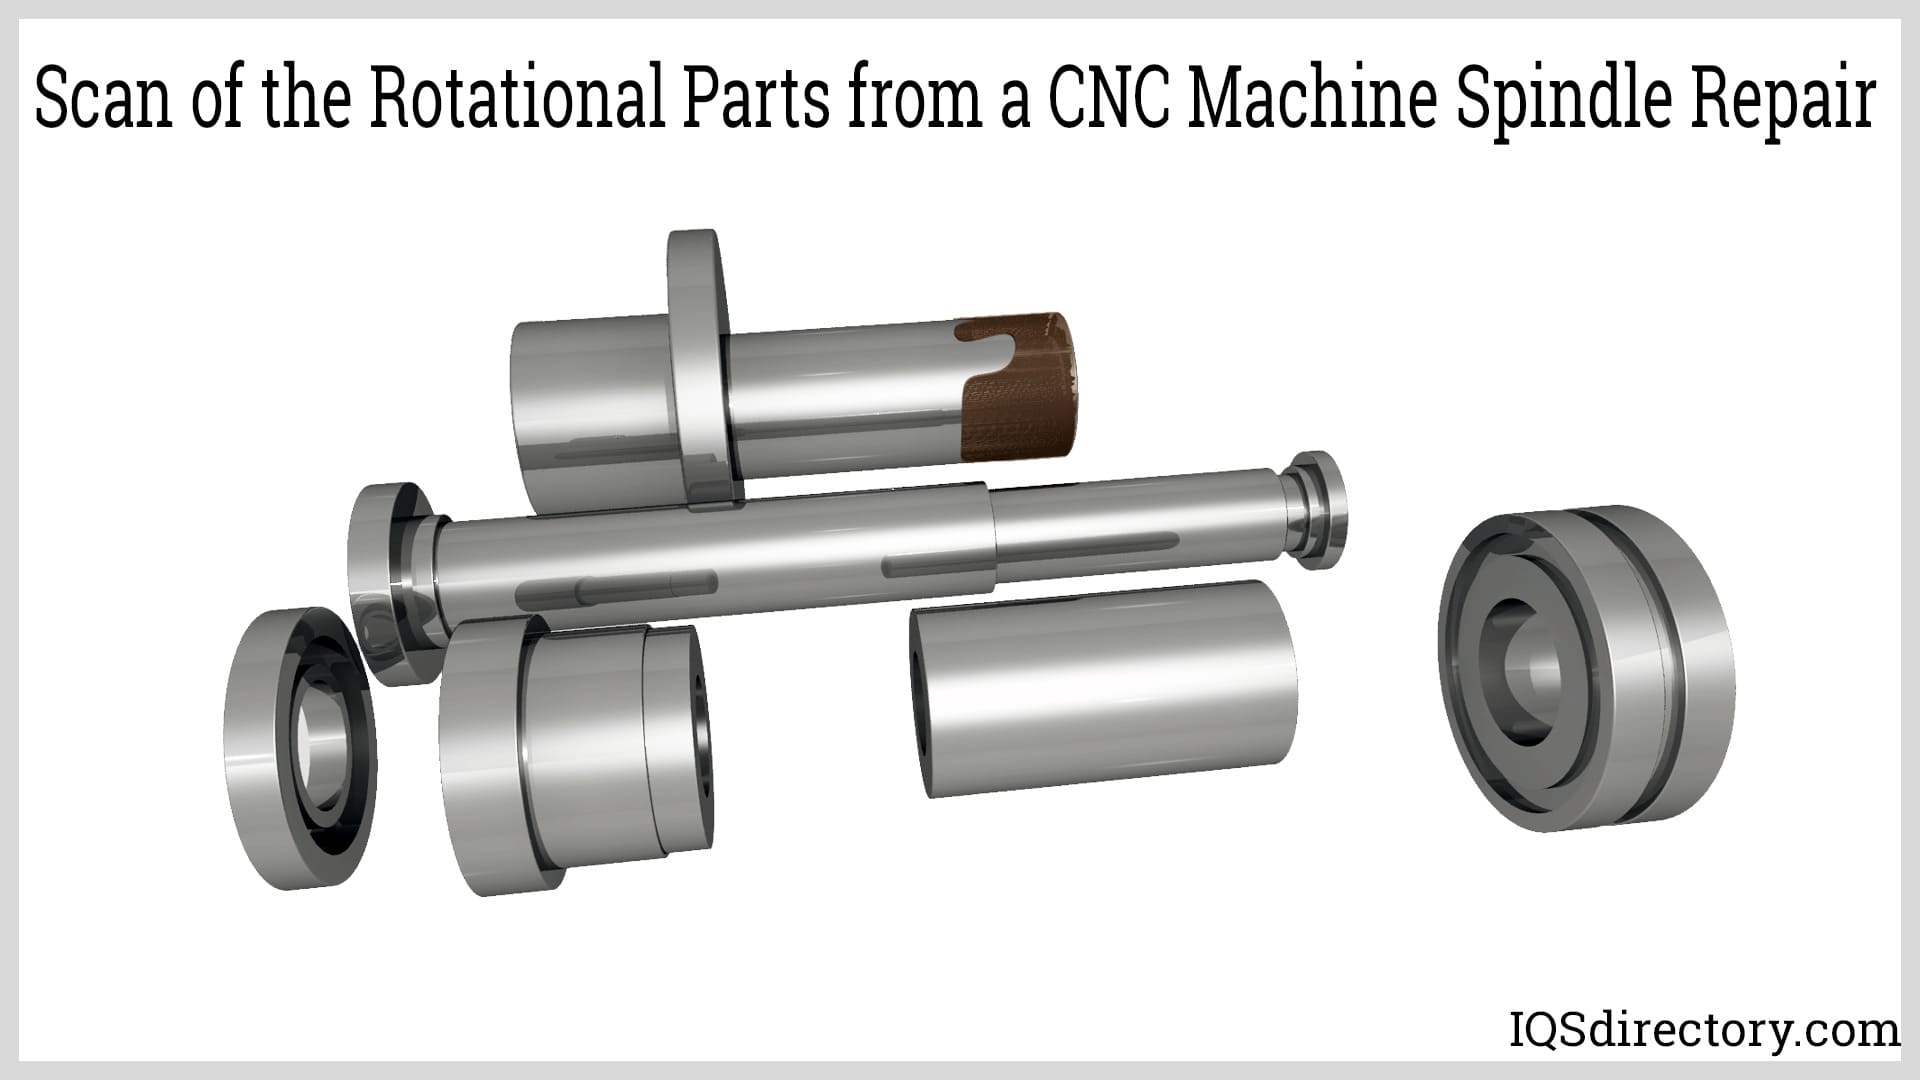 Scan of the Rotational Parts from a CNC Machine Spindle Repair